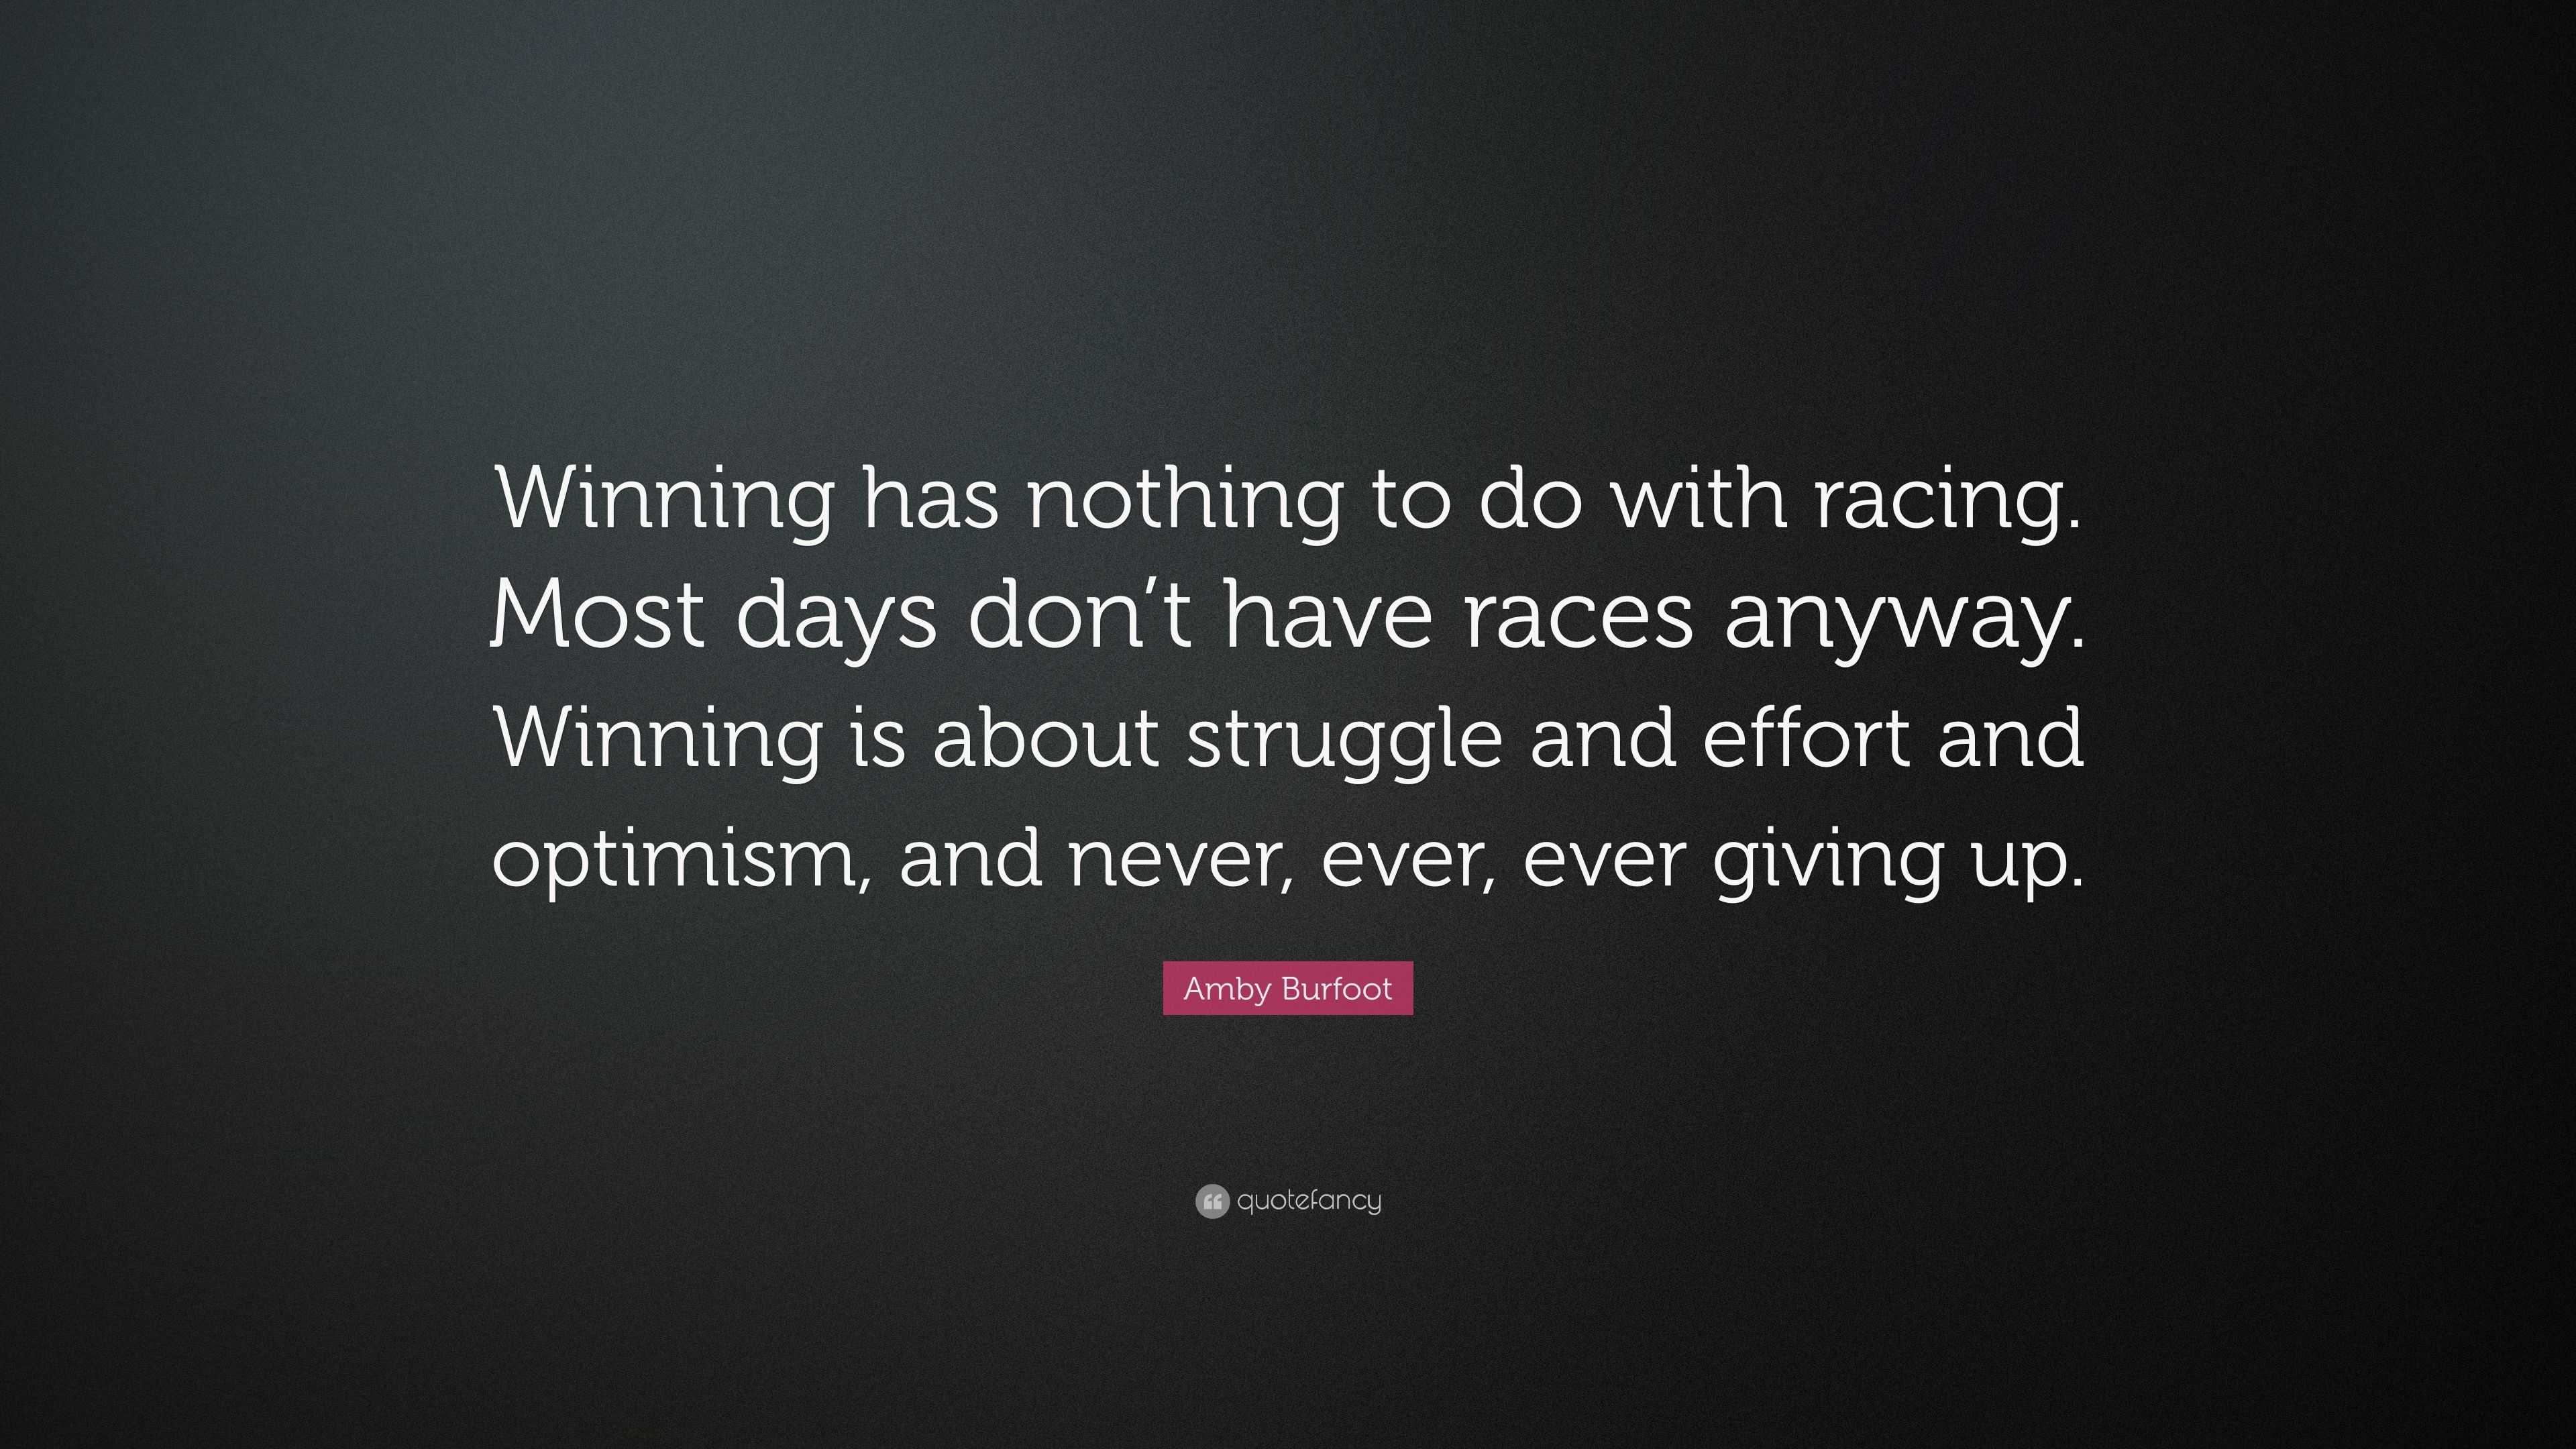 Amby Burfoot Quote: “Winning has nothing to do with racing. Most days ...